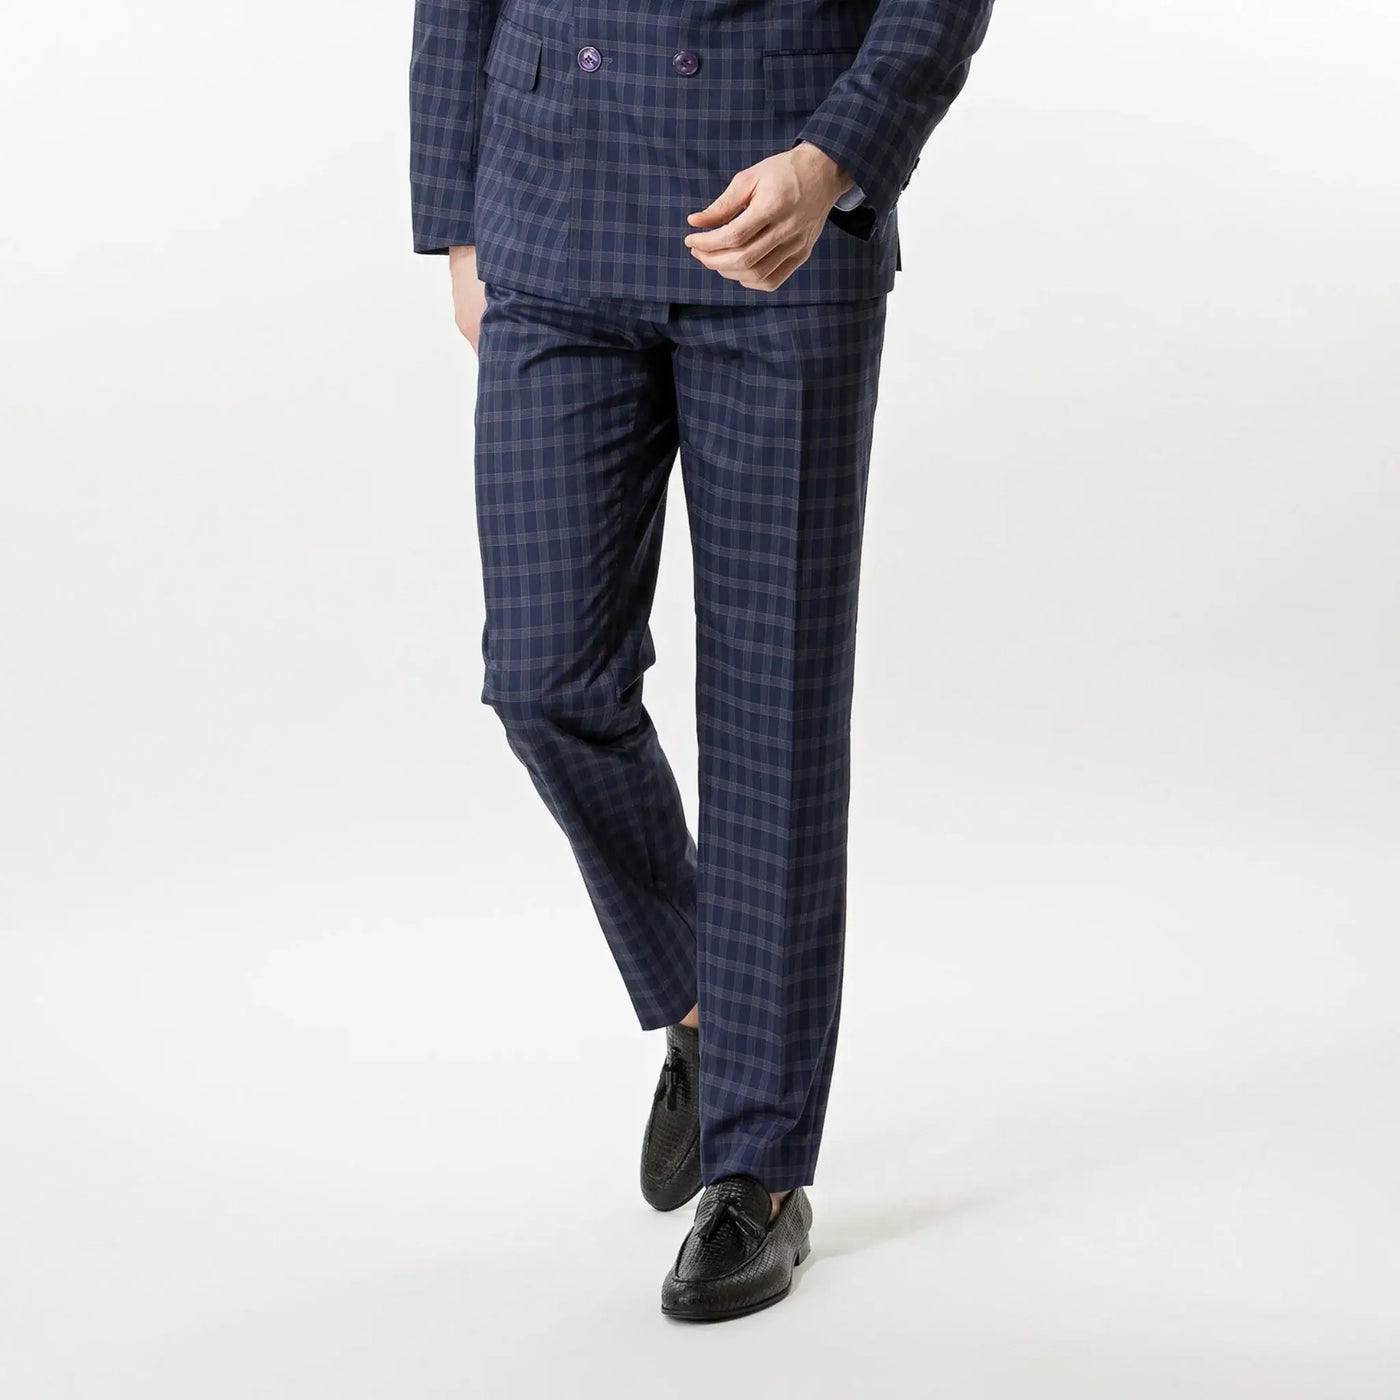 Lodevole Mens Slim Fit Trousers Blue Grey Check Front View